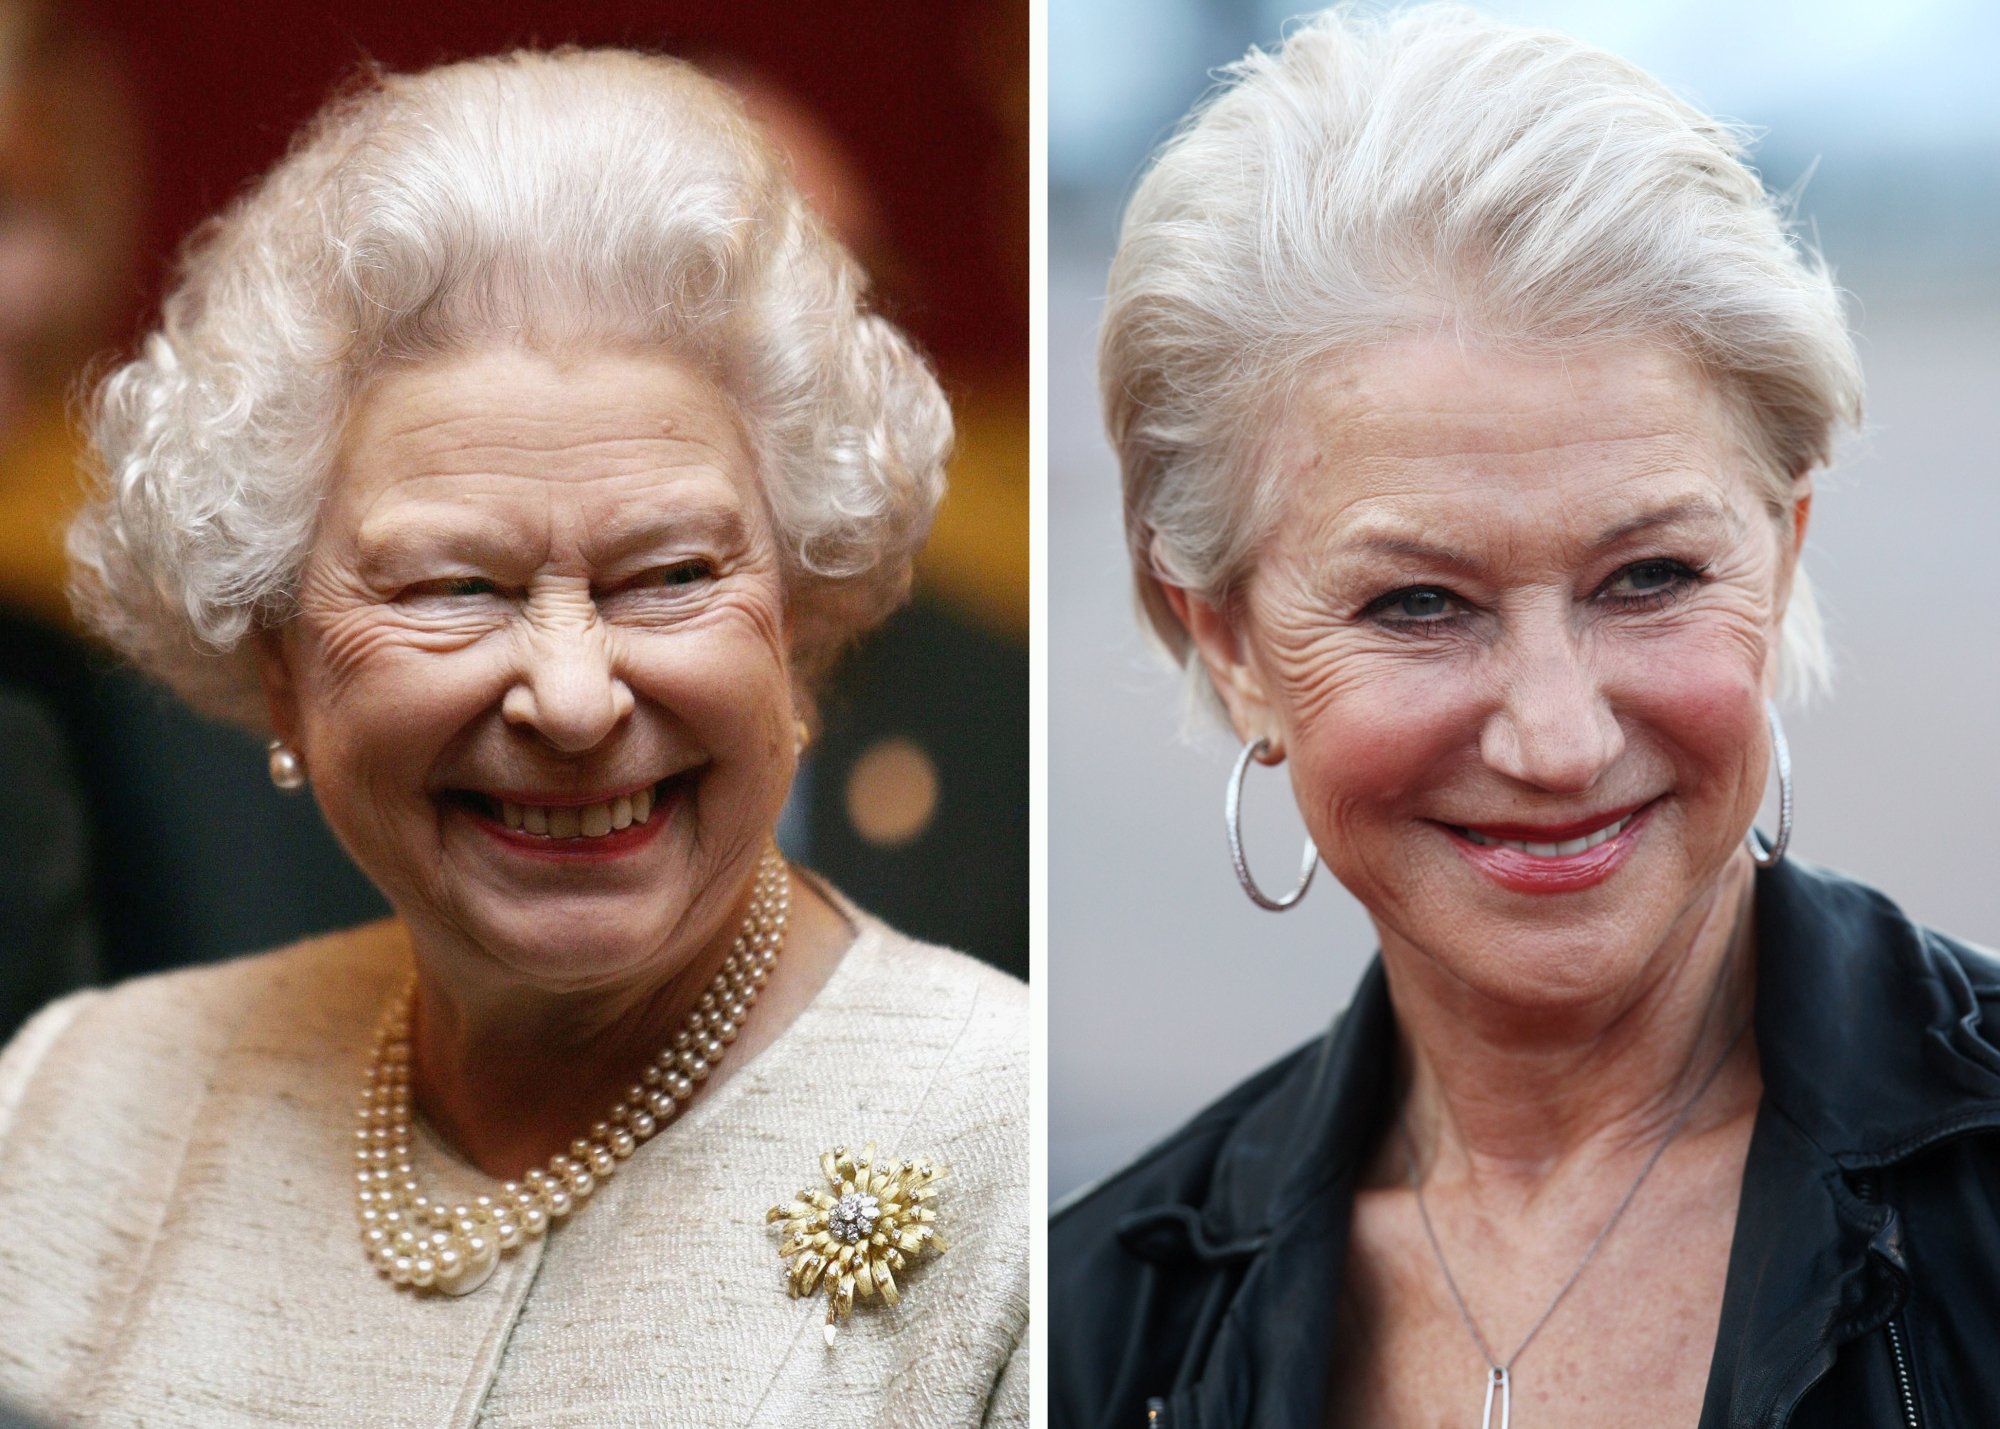 ‘The Queen’: Helen Mirren Wrote a Letter to Queen Elizabeth II Before Playing the Oscar-Winning Role